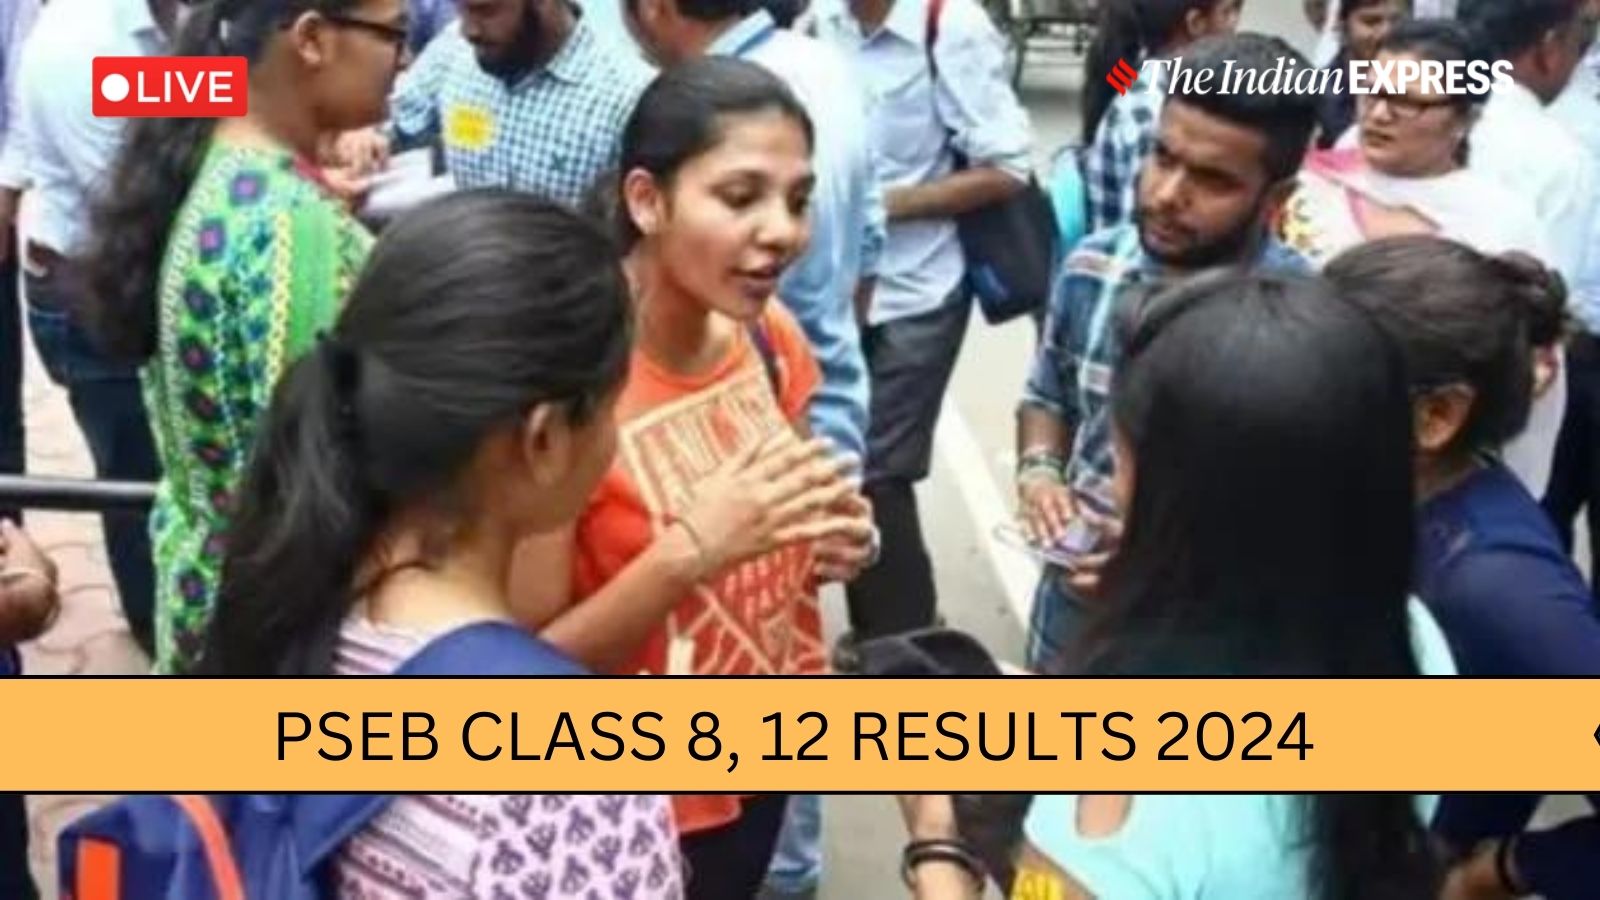 PSEB 8th 12th Result 2024 Live Updates At what time Punjab Board